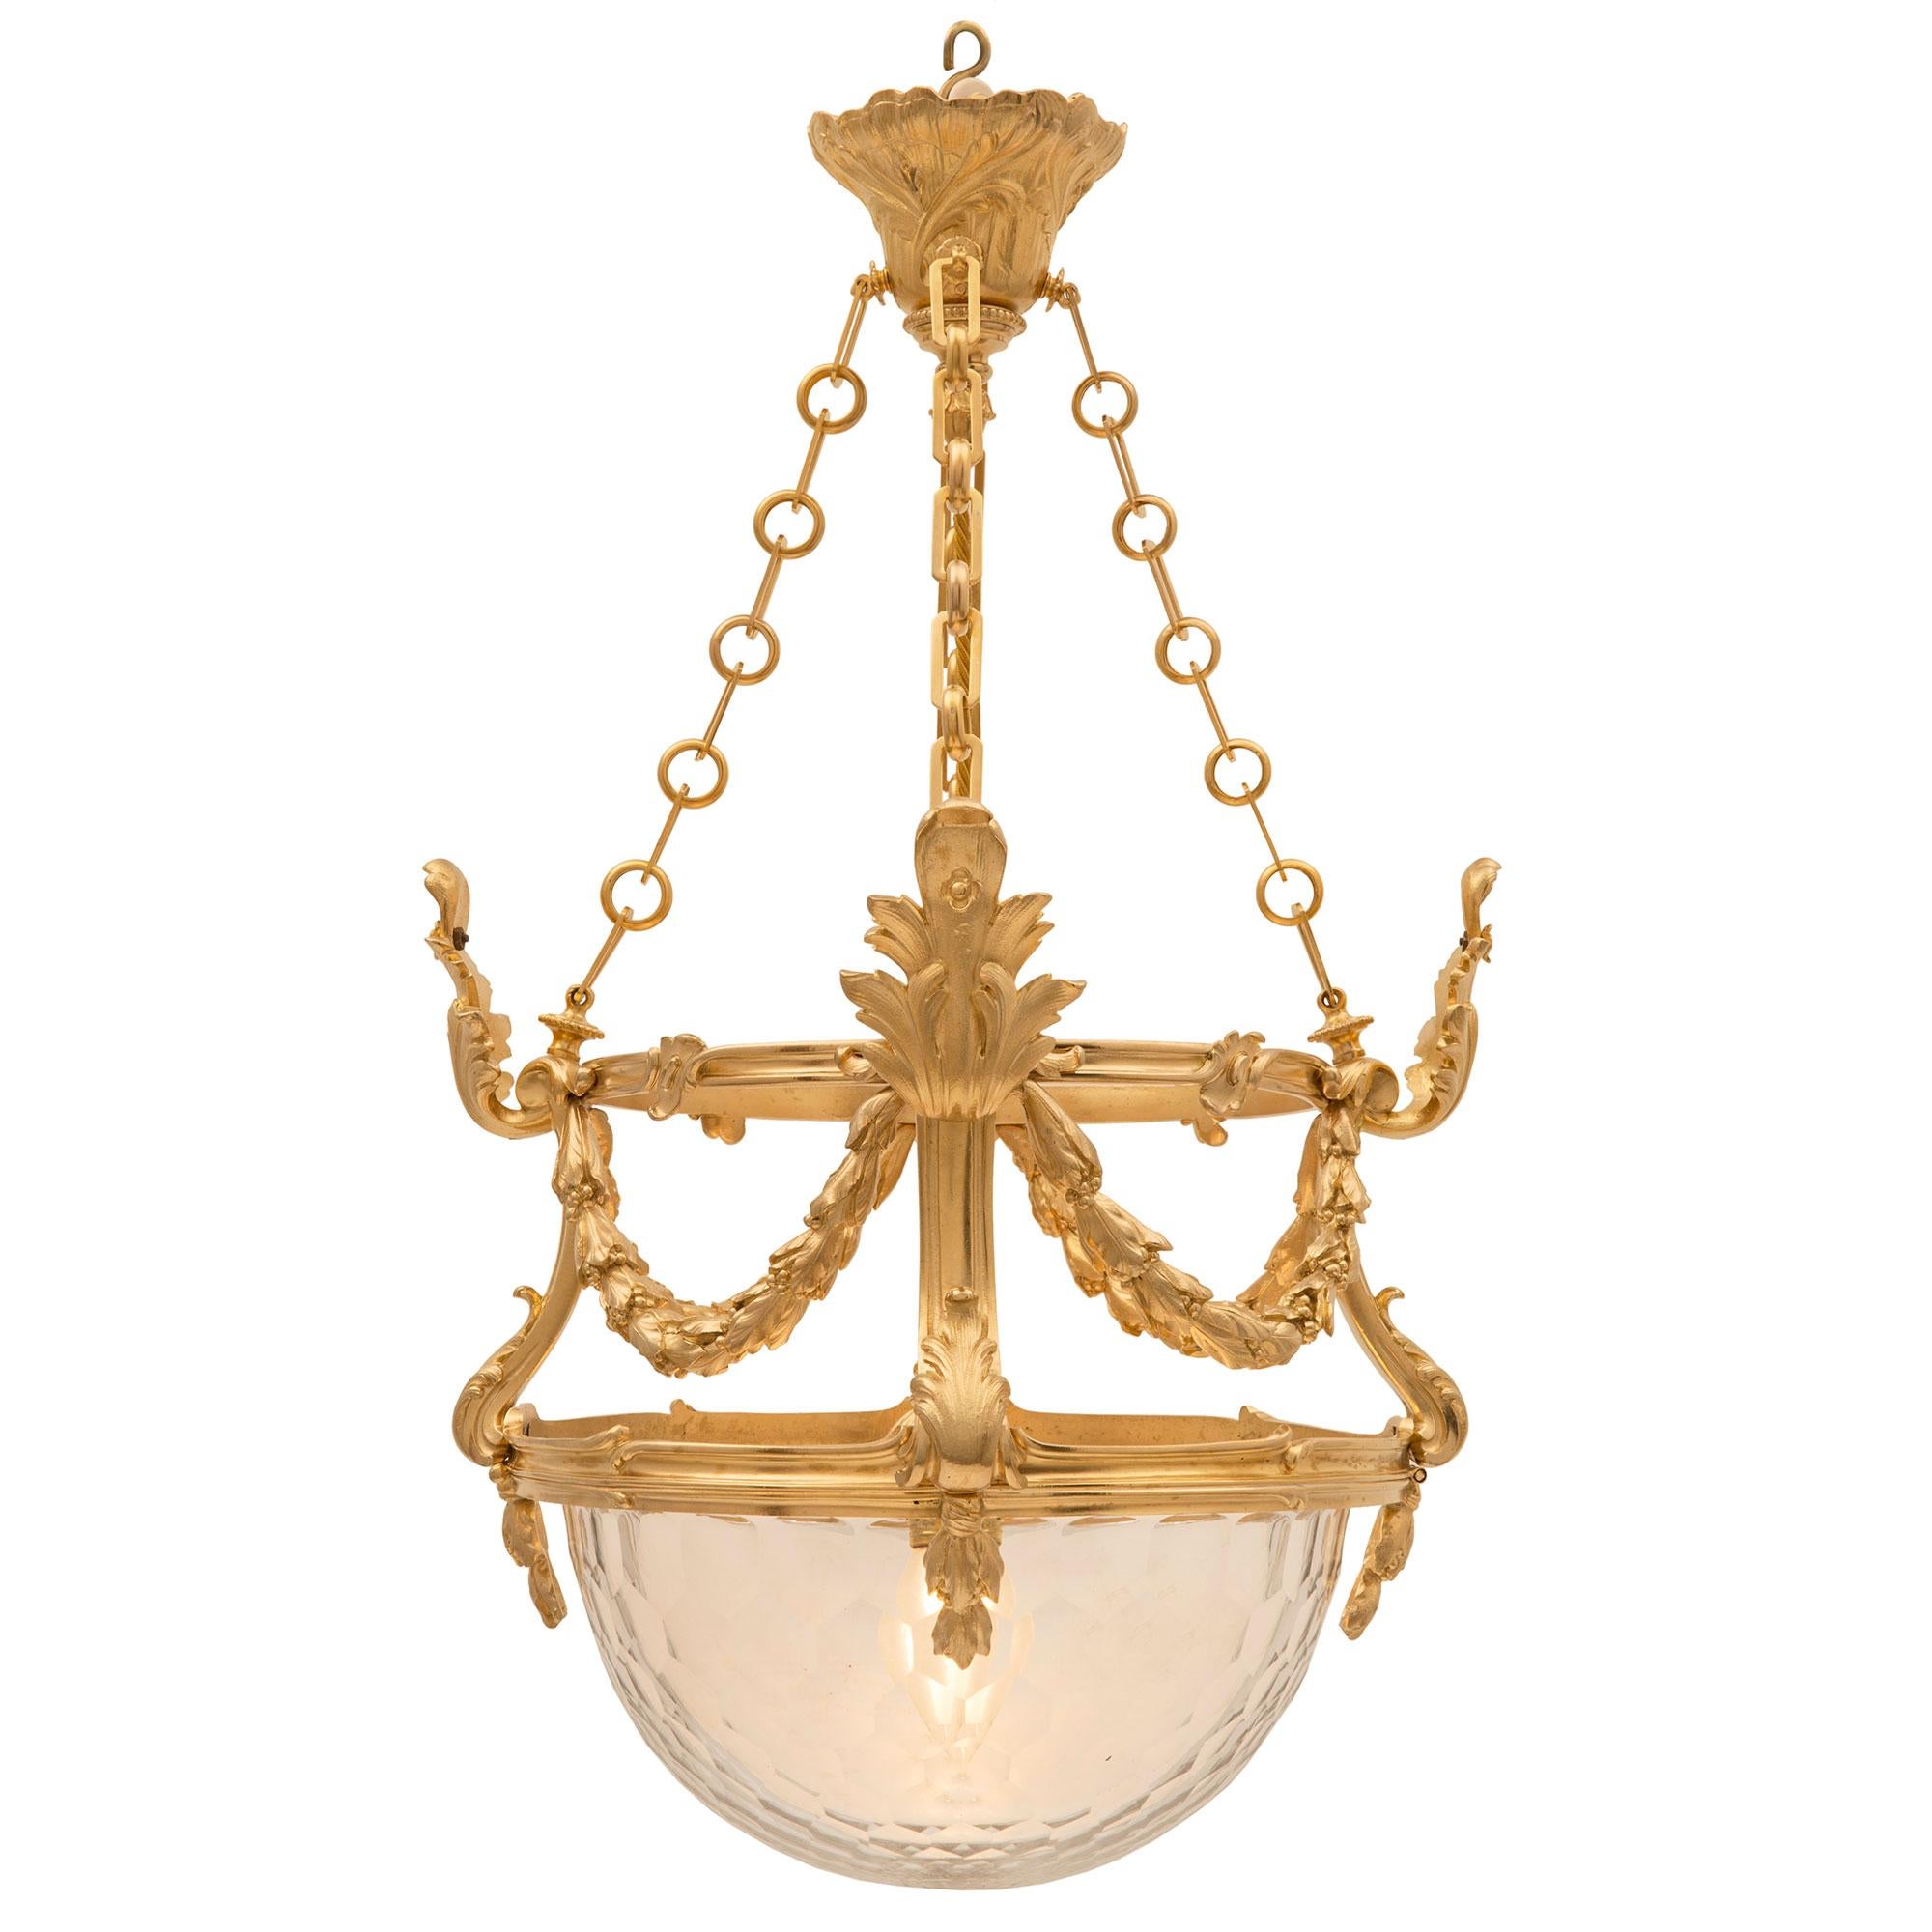 A remarkable French 19th century Louis XVI st. Baccarat crystal and ormolu chandelier. The chandelier is centered by a most elegant Baccarat crystal bowl with a fine honeycomb cut design which opens downwards on its original hinges. Above the